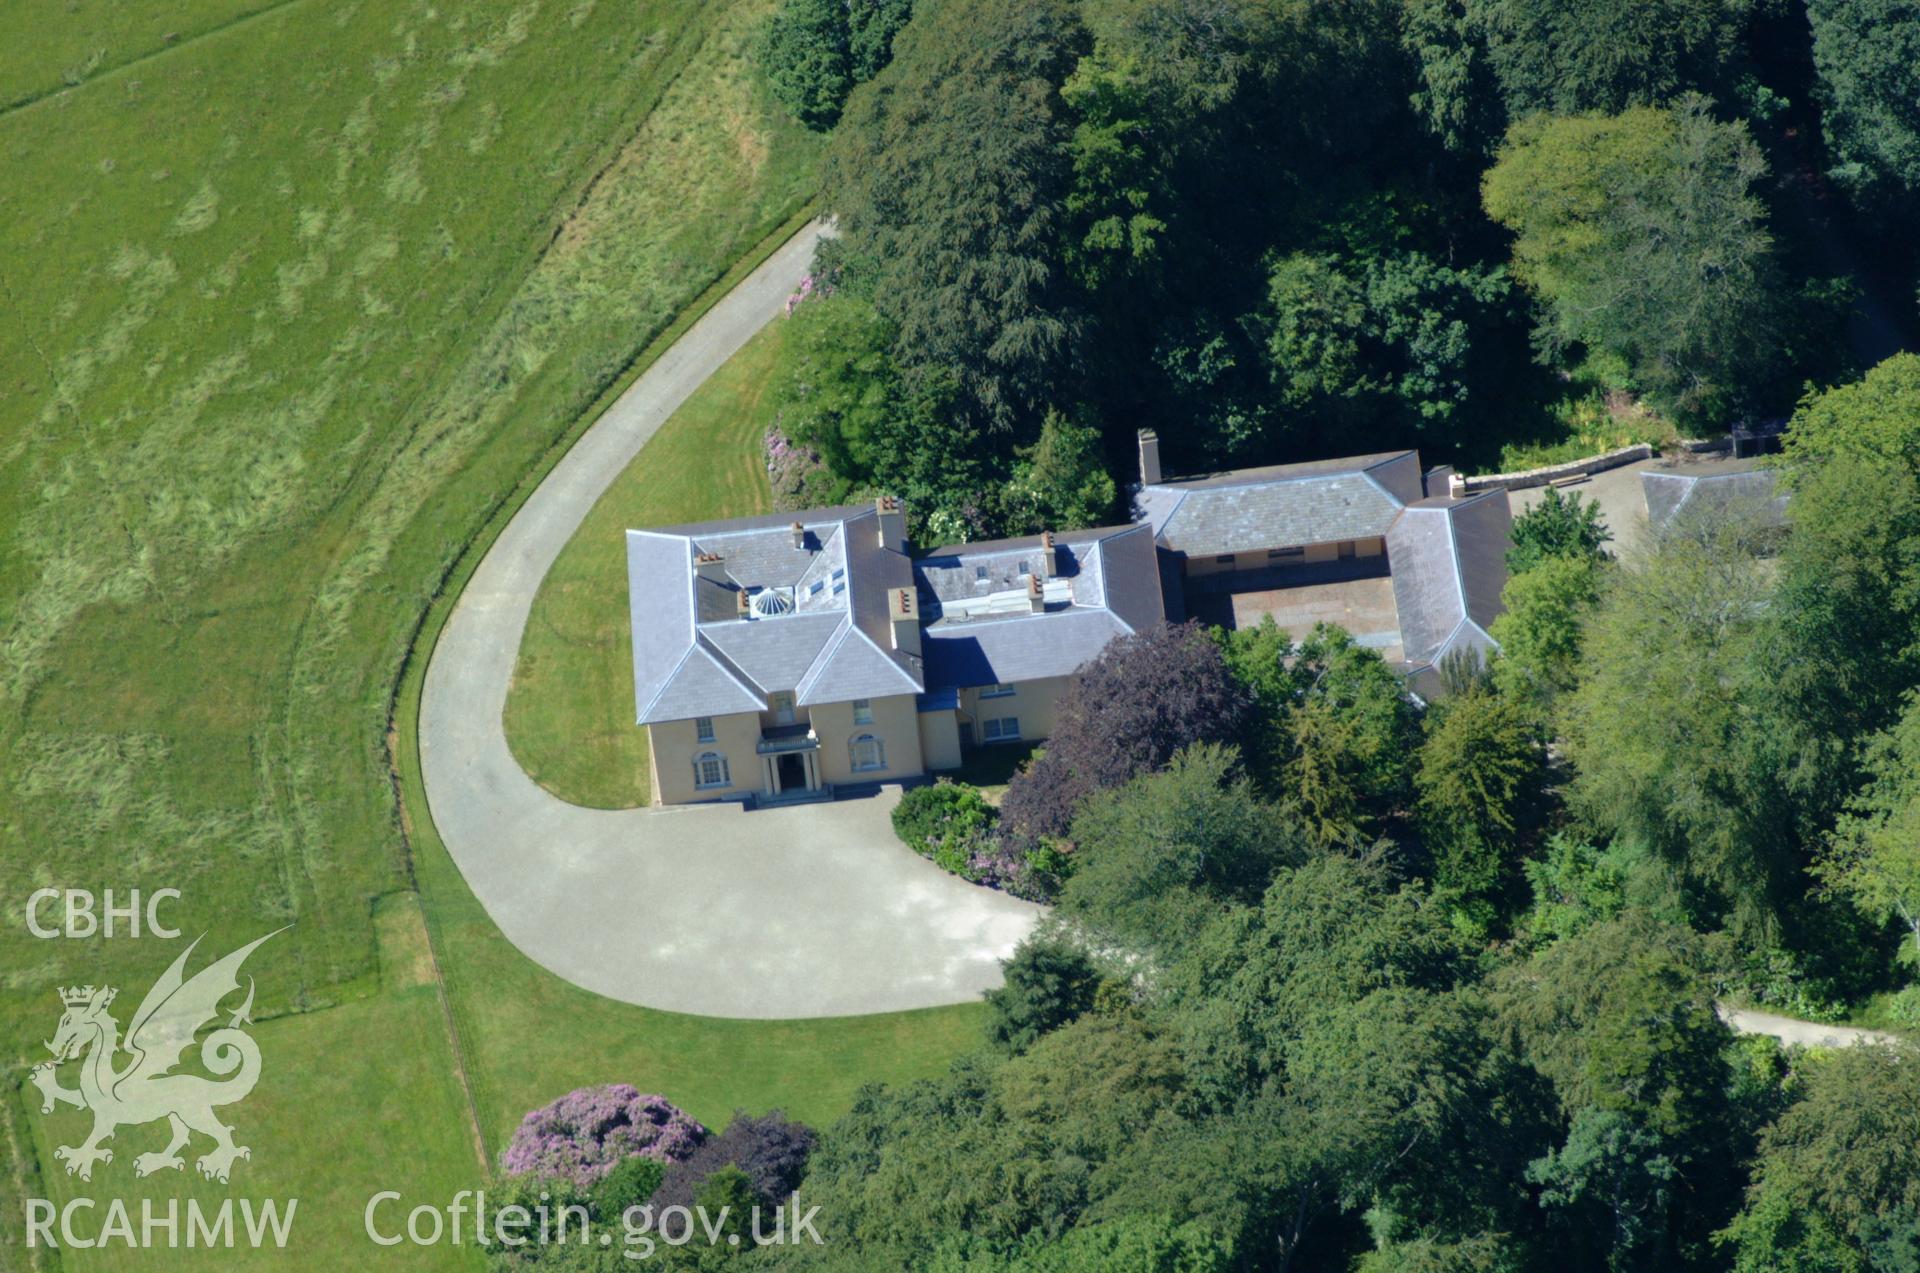 RCAHMW colour oblique aerial photograph of Llannerchaeron House taken on 14/06/2004 by Toby Driver